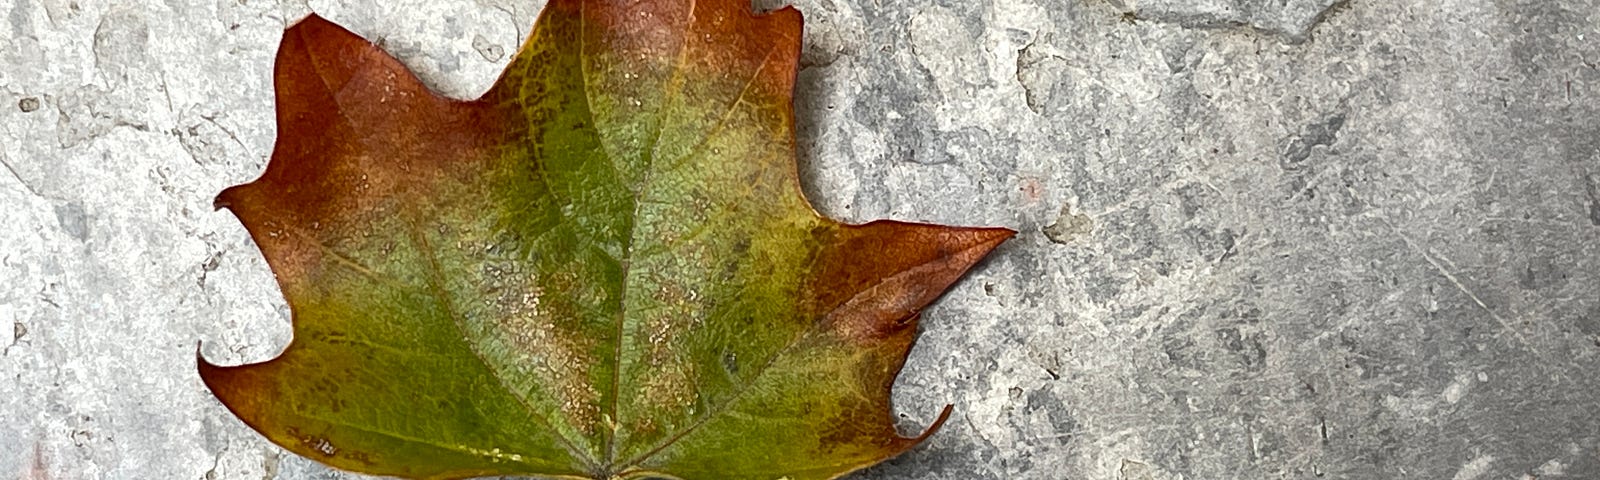 A small maple leave that is green in the middle and red on the edges.